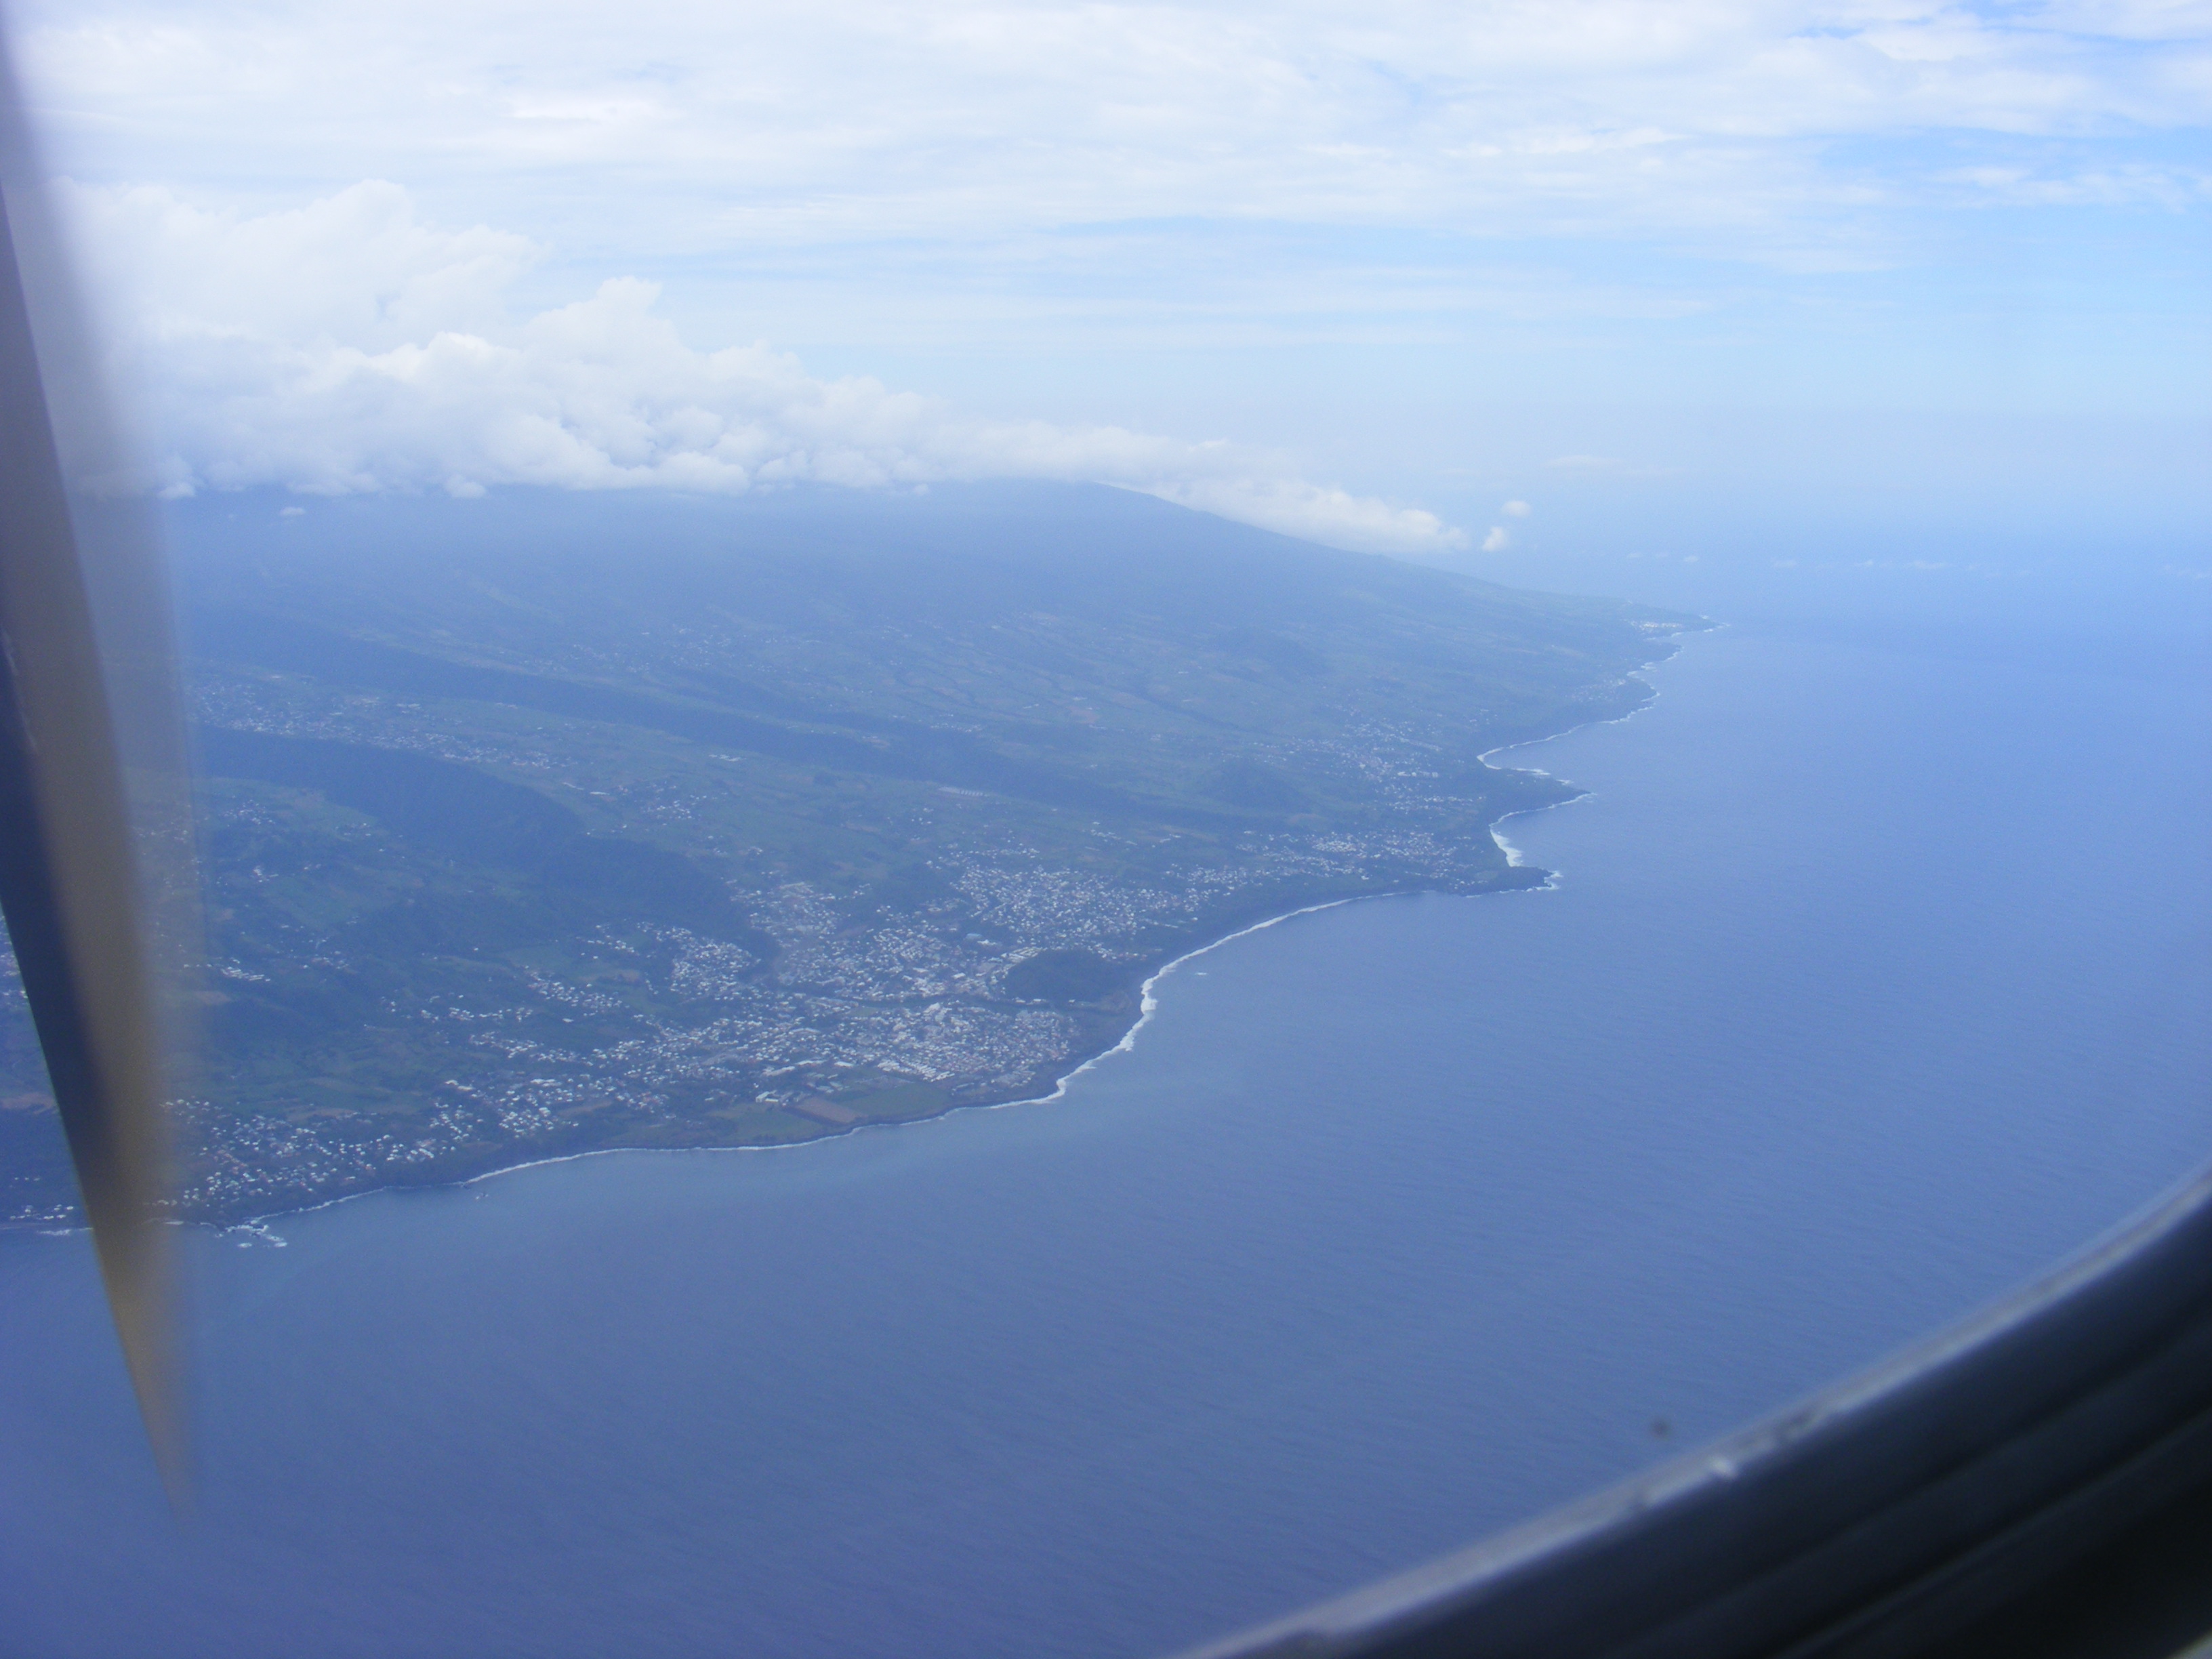 my first glimpse of Reunion Island